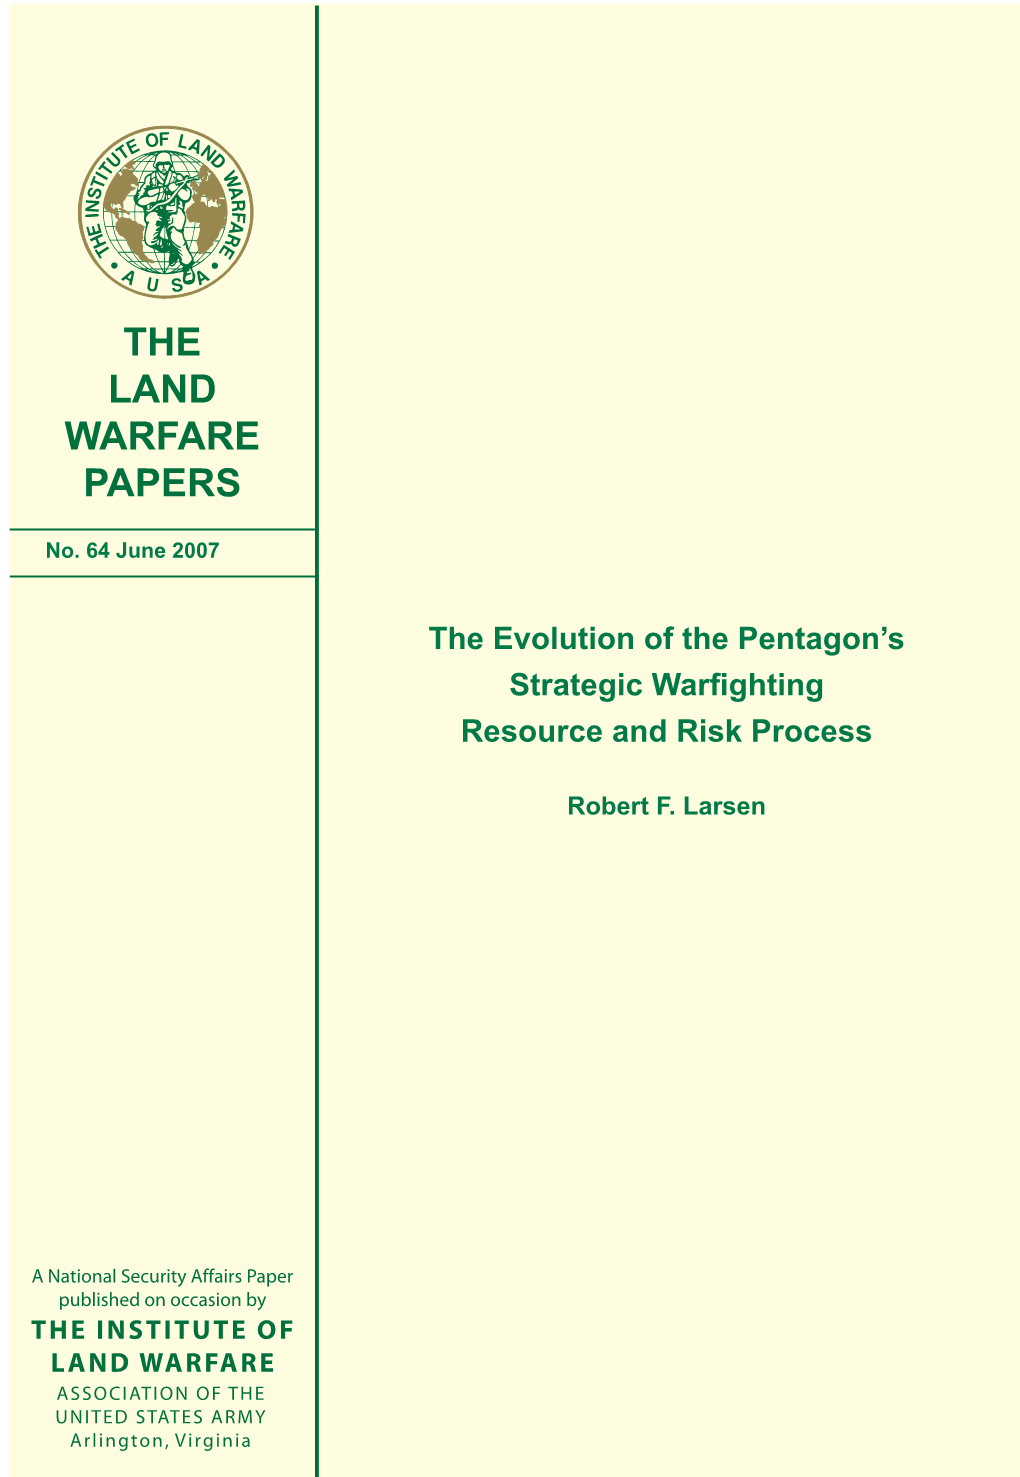 The Land Warfare Papers